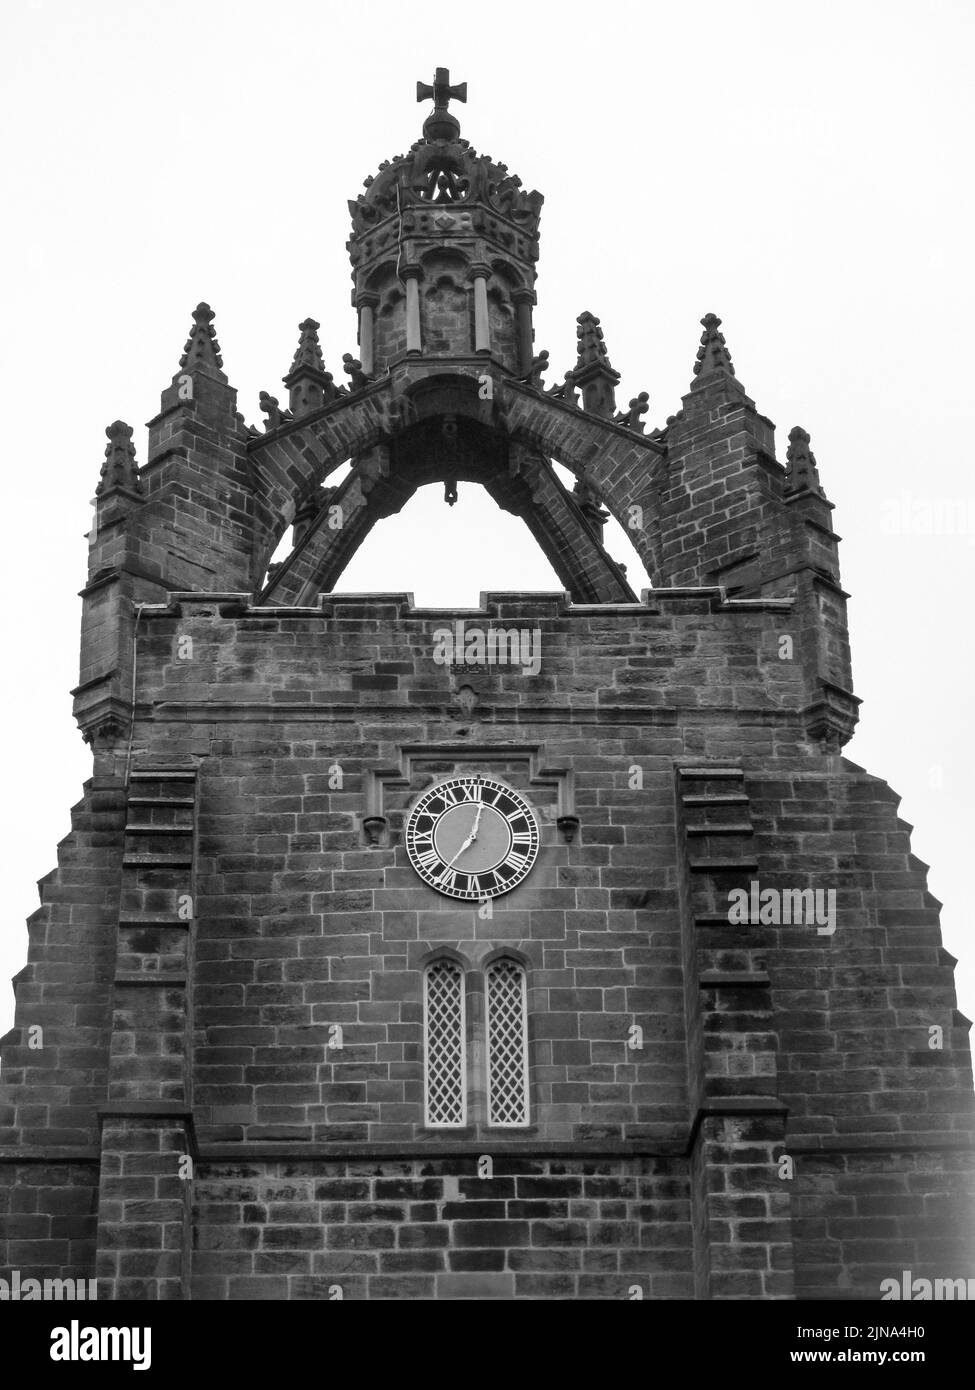 The Architectural imperial crown on top of the Chapel of Kings collage in Aberdeen Scotland, in Black and white Stock Photo